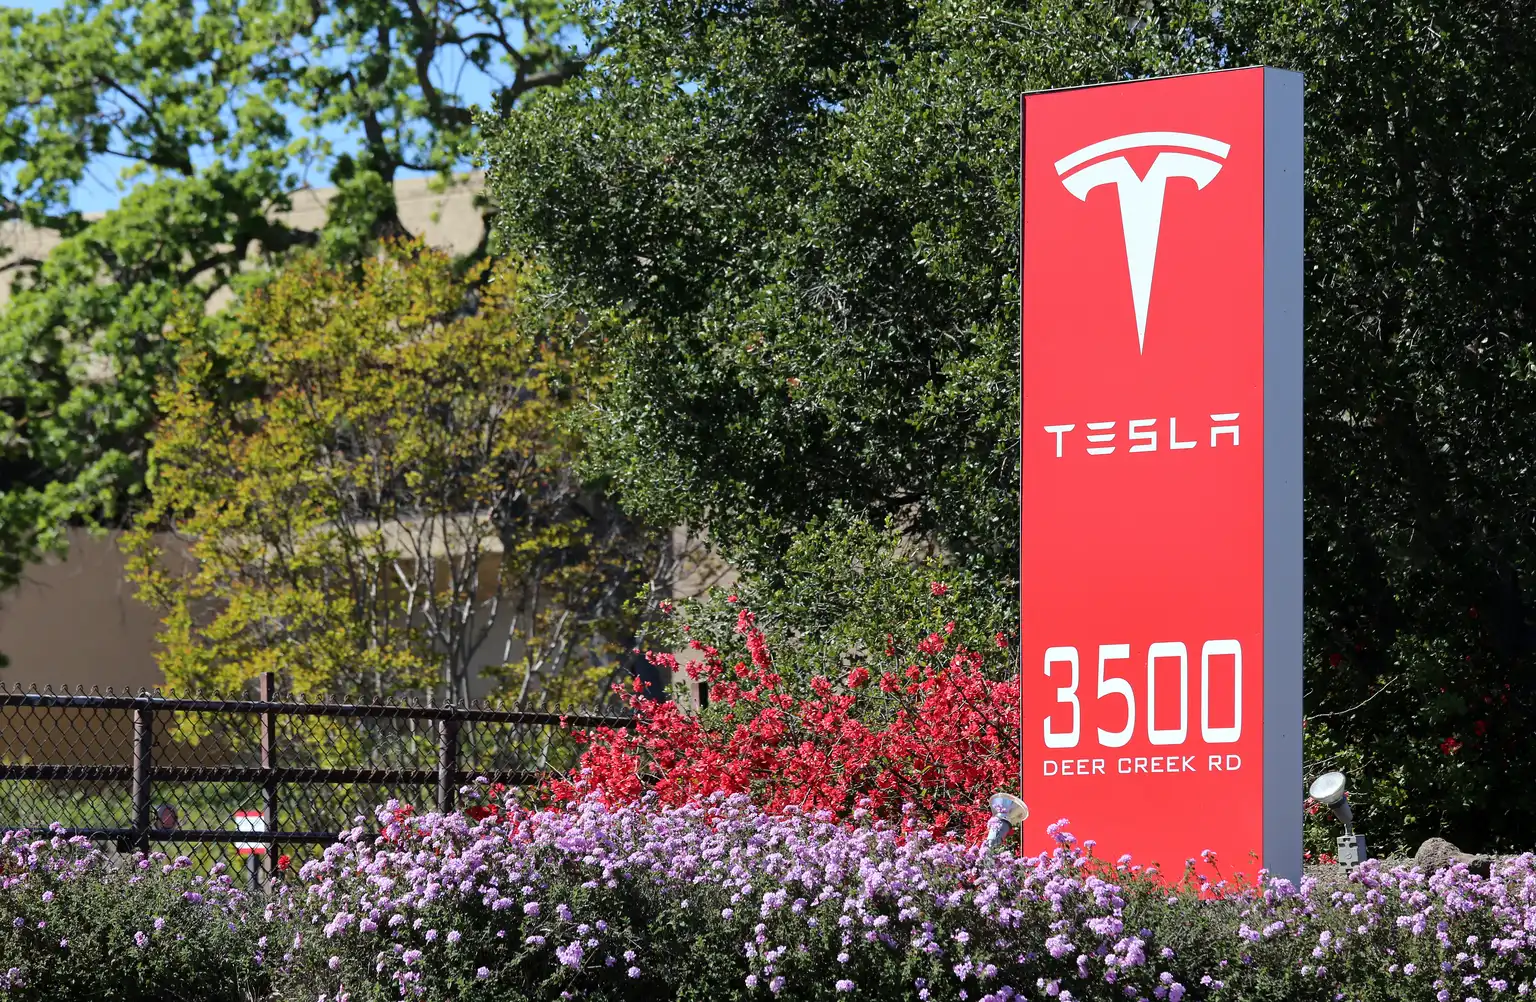 Tesla: Q1 Wasn't Great, But The Growth Story Is Better Than Ever - Seeking Alpha